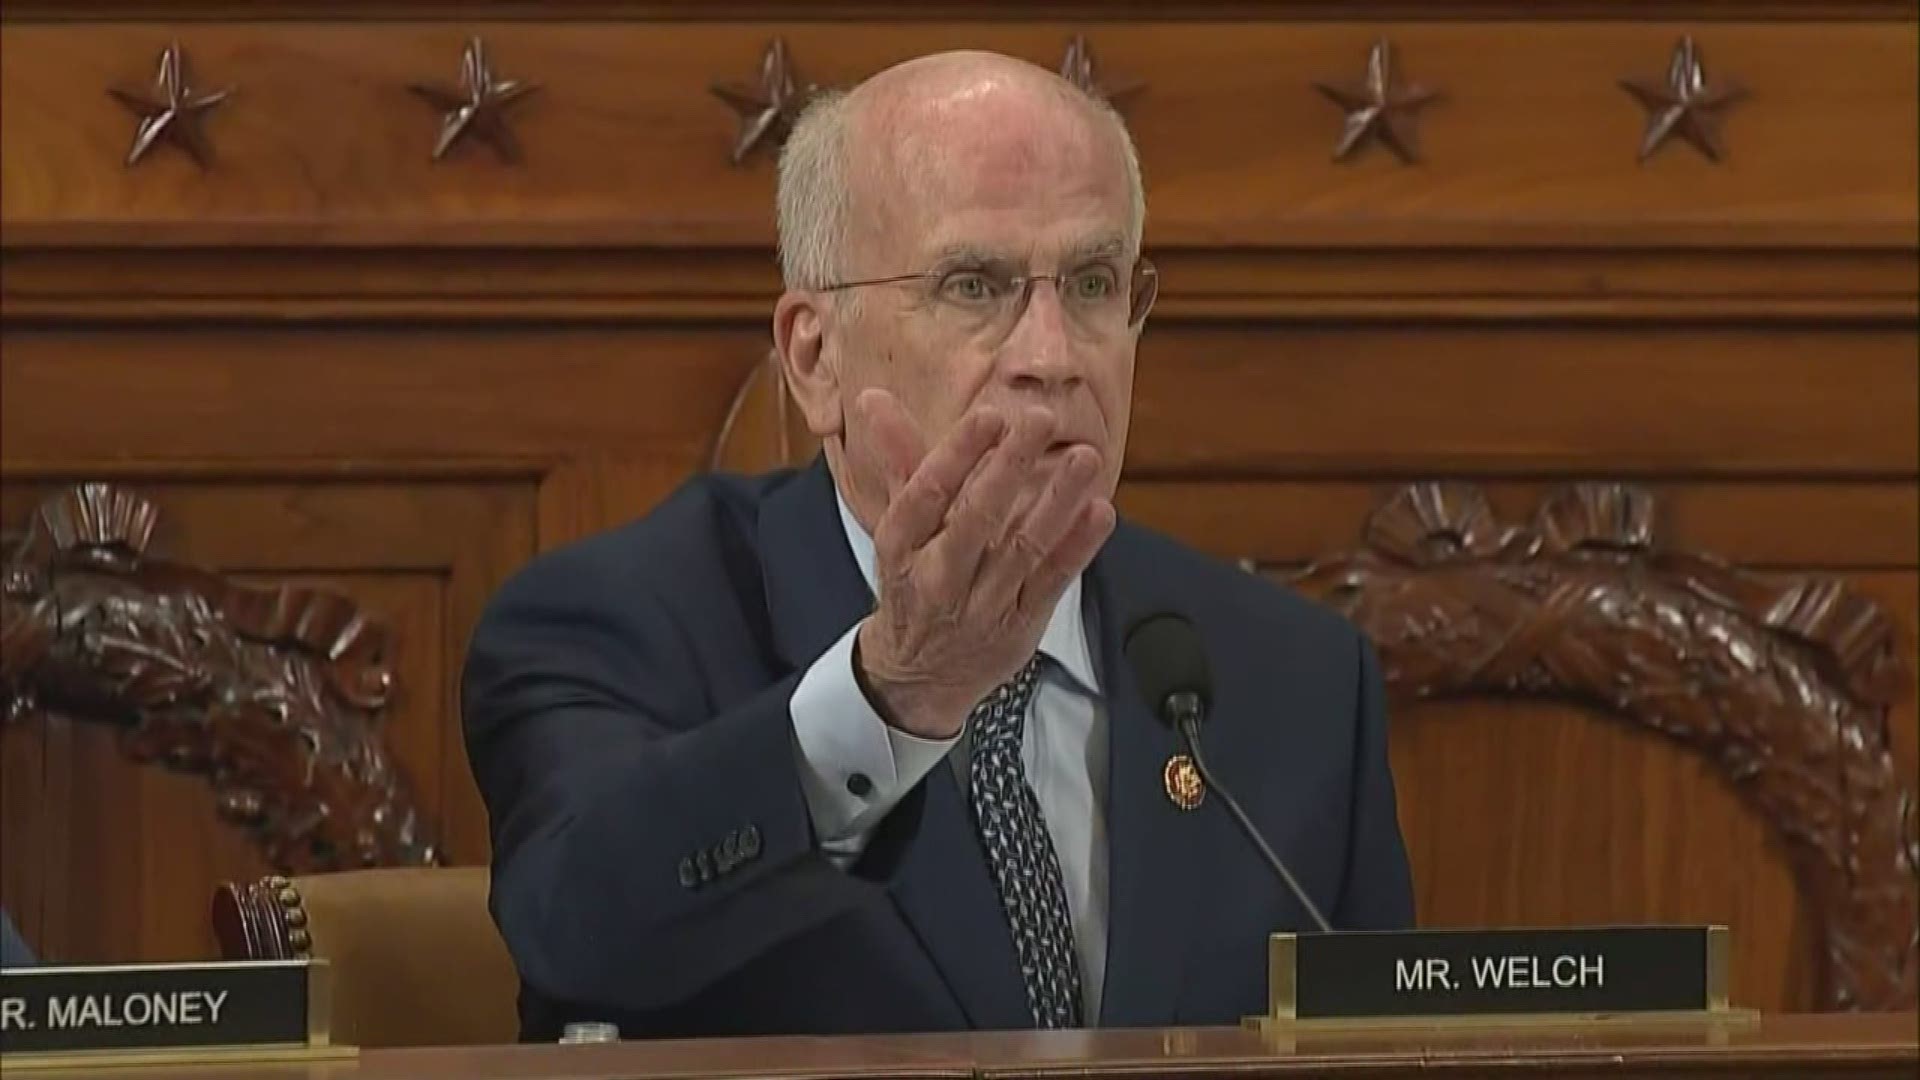 After Congressman Jim Jordan's impassioned statements on the unfairness of the impeachment process, Rep. Peter Welch drew laughter as he invited Trump to testify